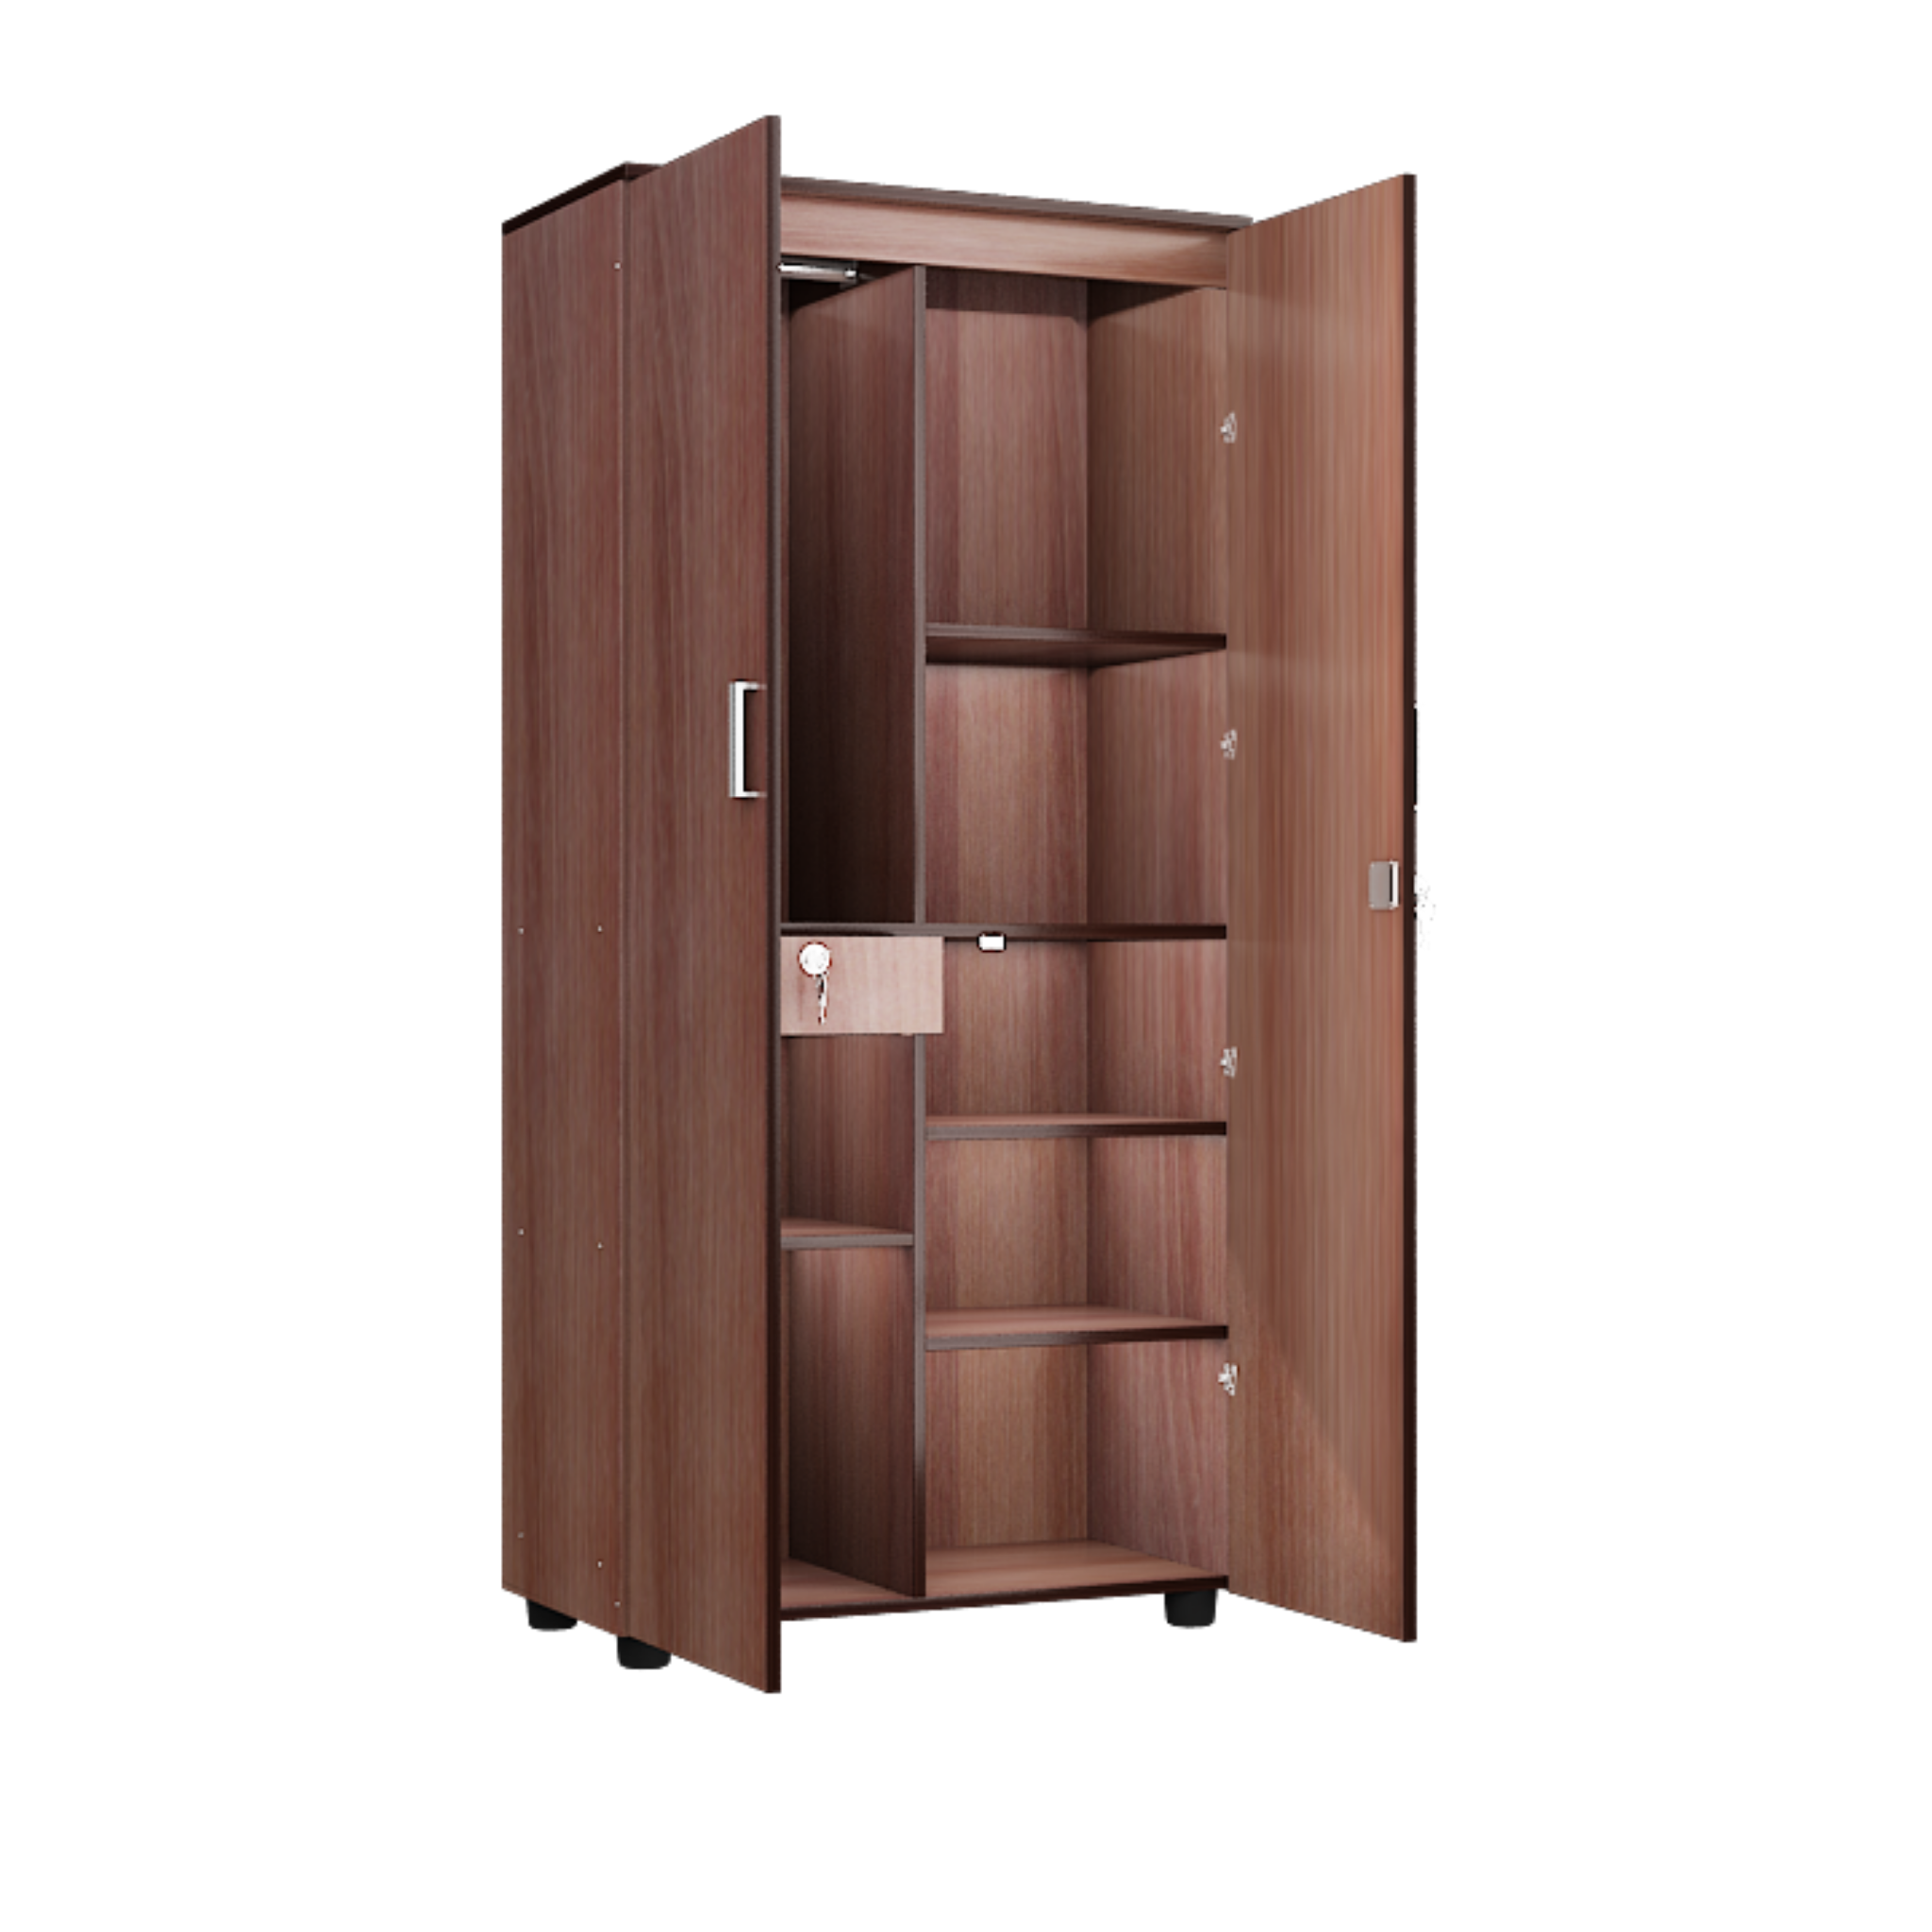 Super and Luxury Two Door Wardrobe with Center Partition